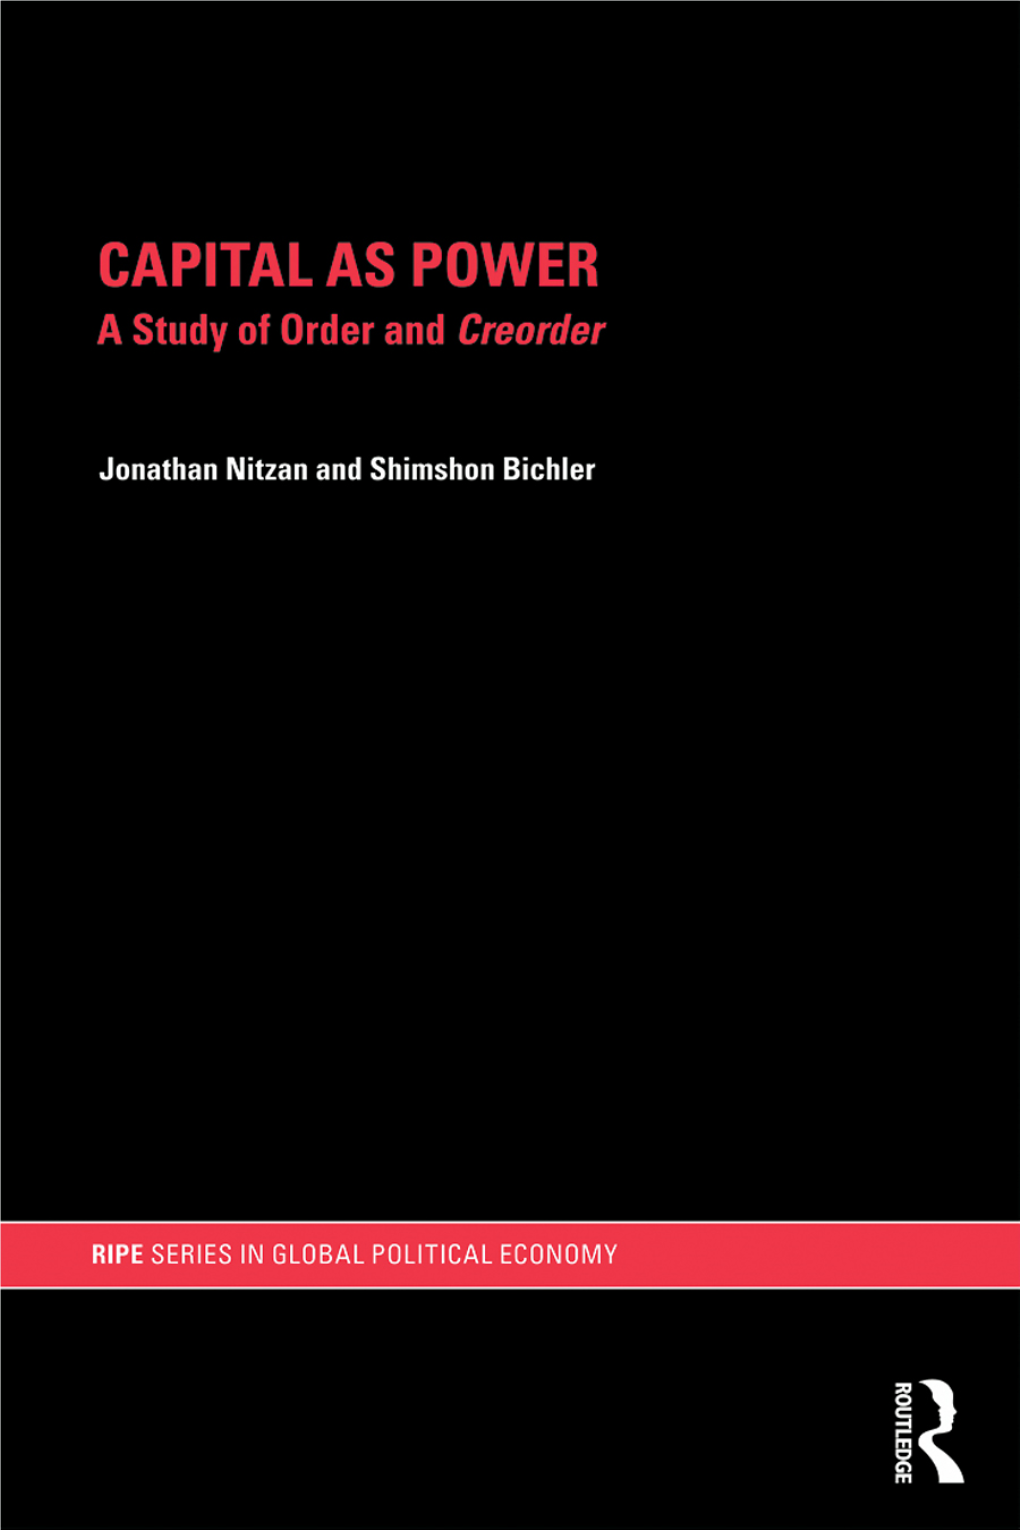 Capital As Power: a Study of Order and Creorder